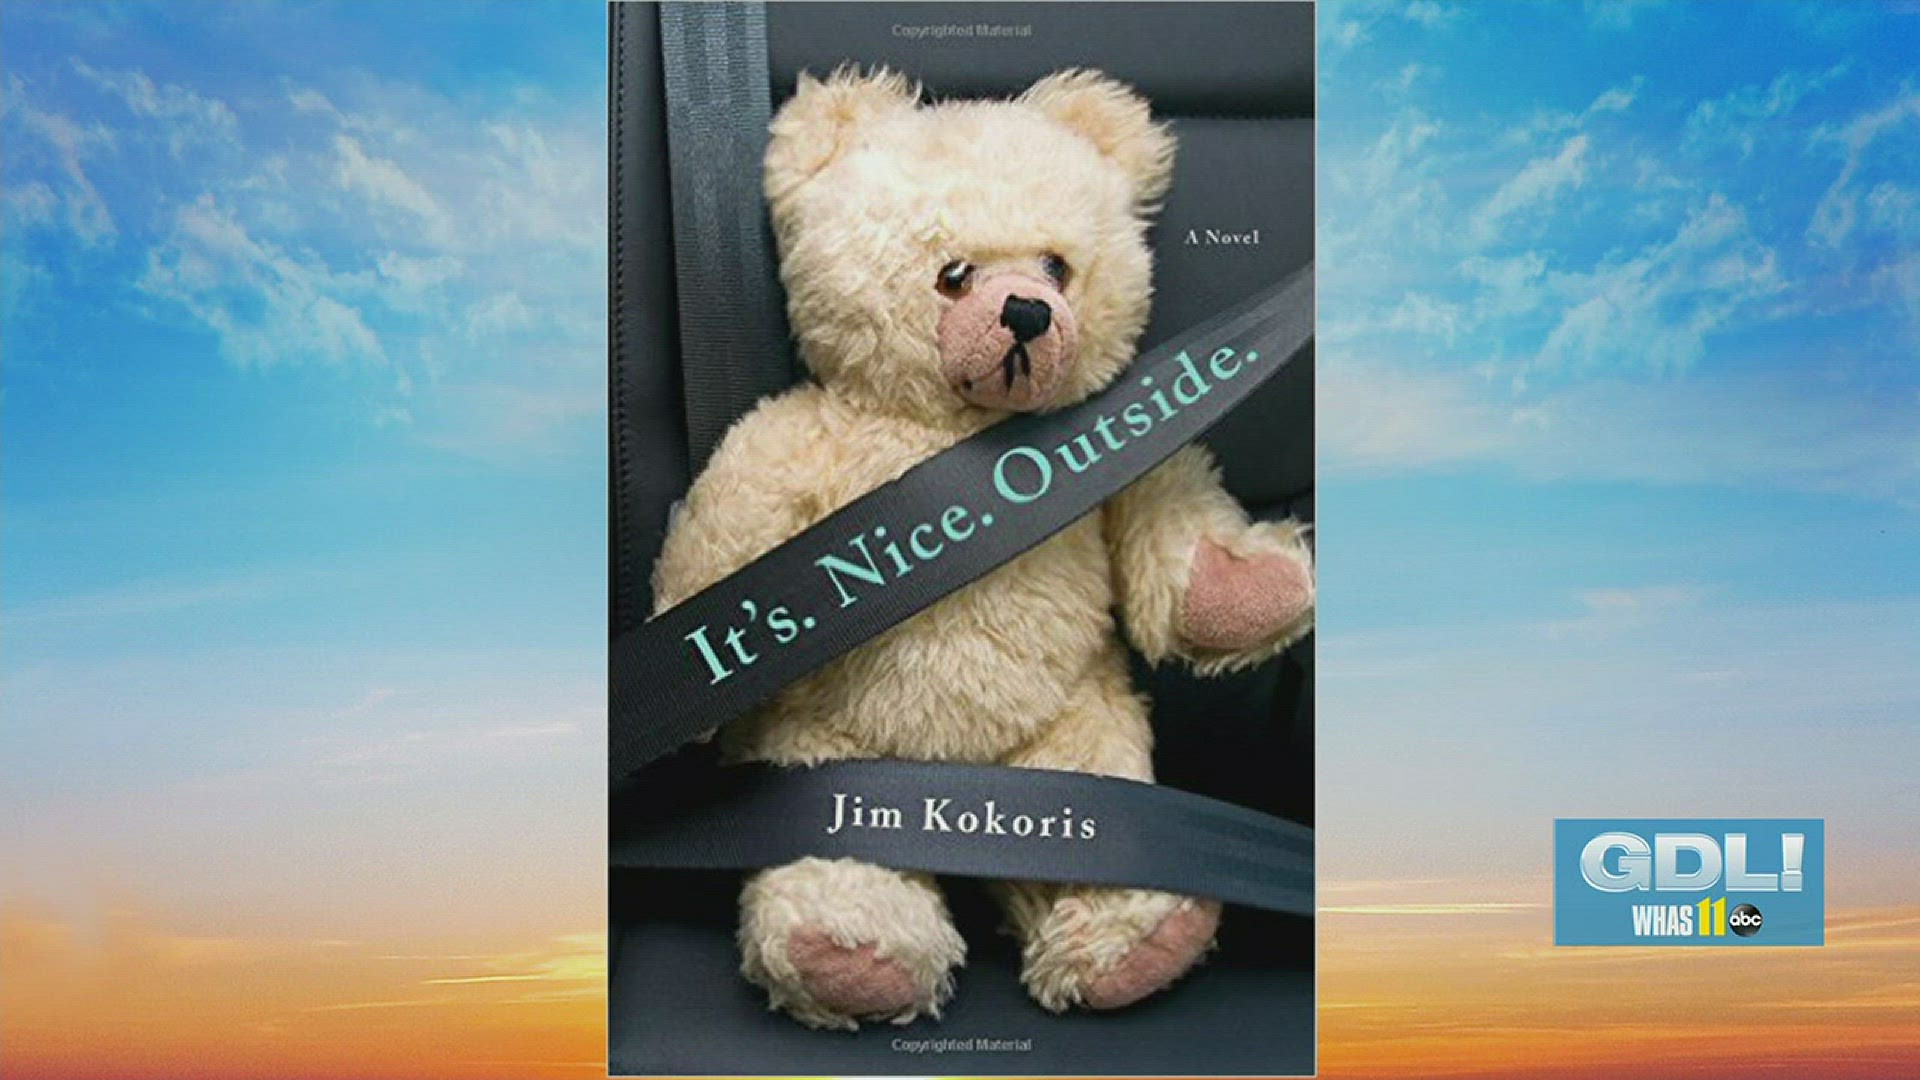 You can get Jim's book, "It's. Nice. Outside" on Amazon, and locally at Carmichael's Bookstore or at Barnes and Noble.